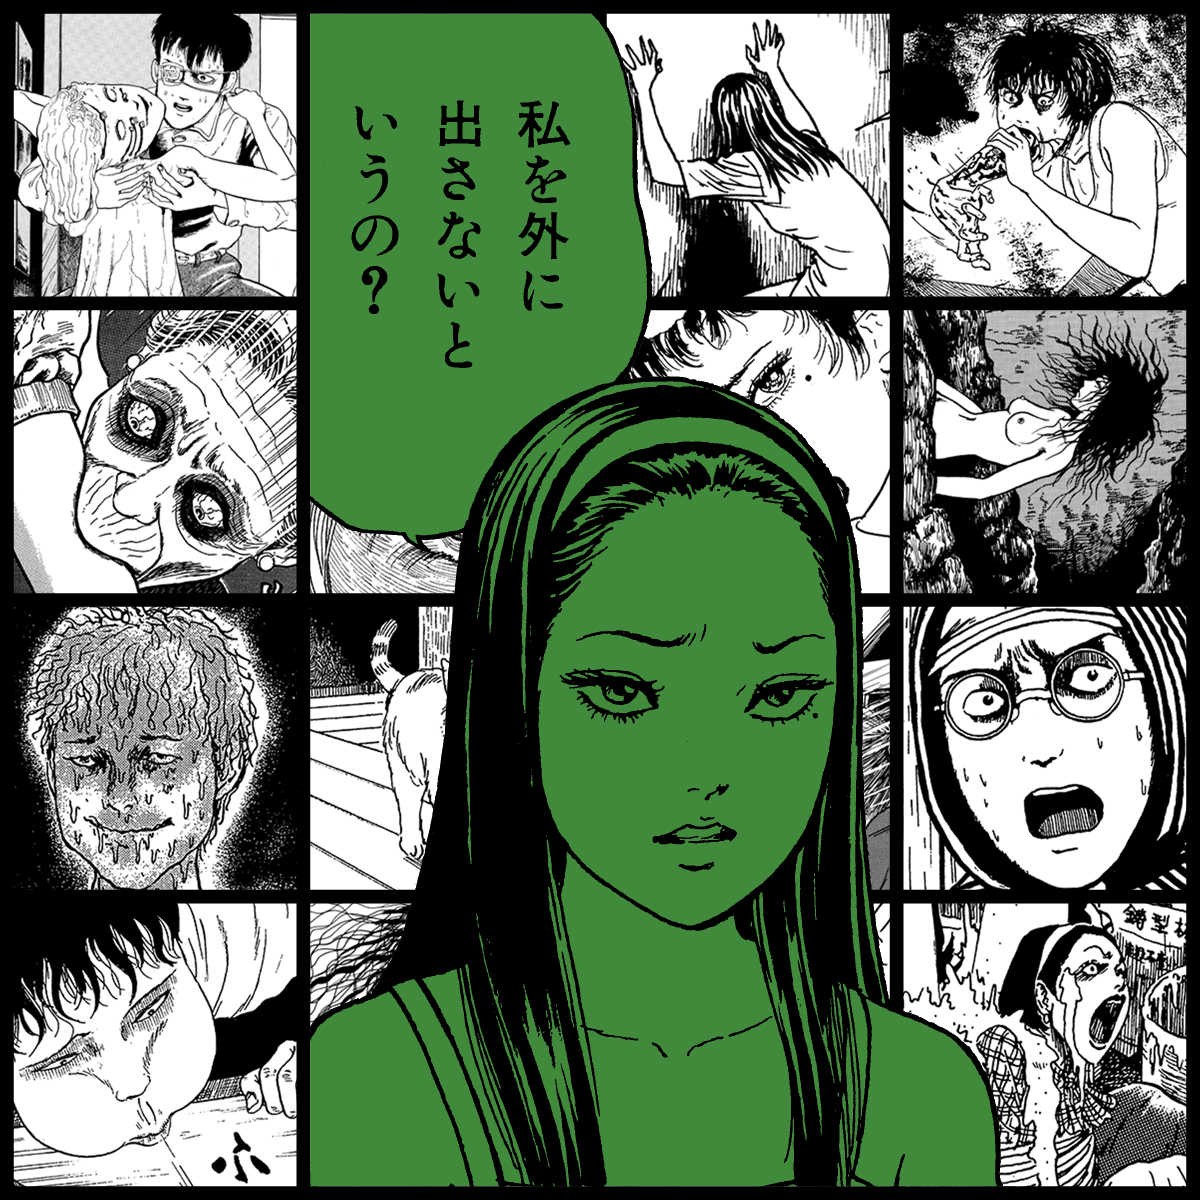 TOMIE by Junji Ito #749